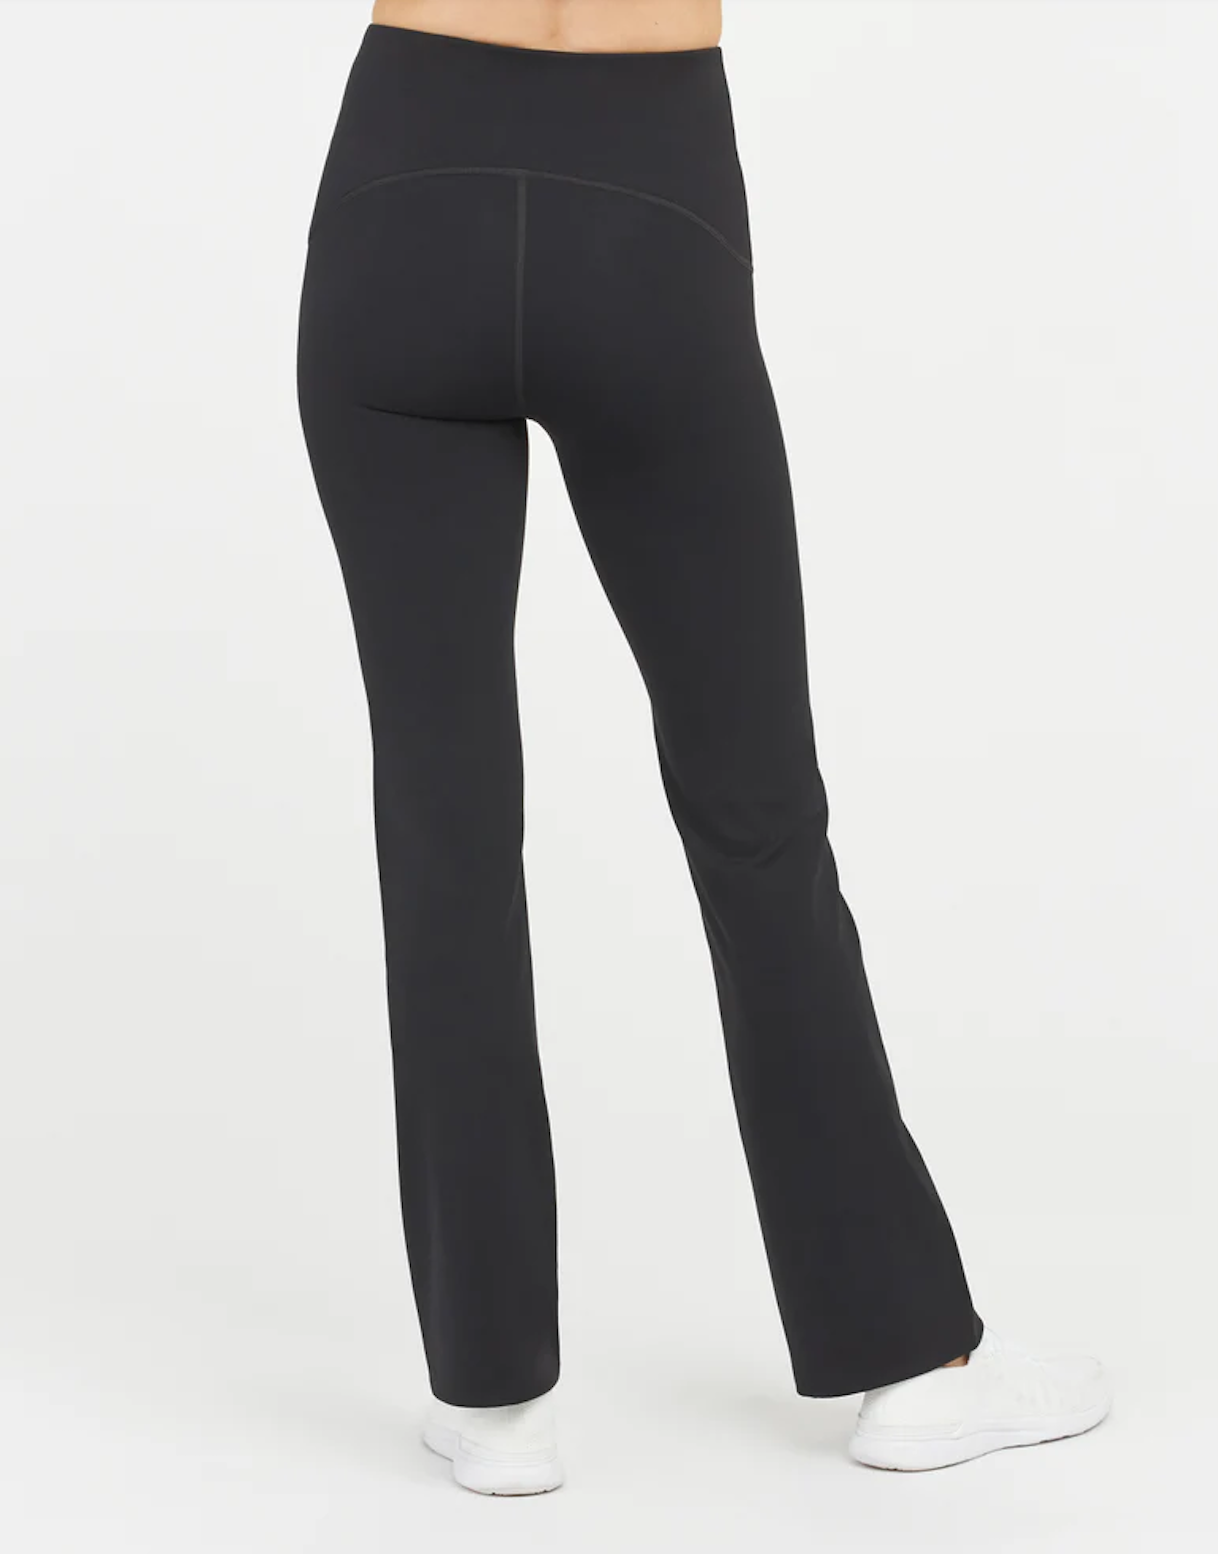 SPANX BOOTY BOOST YOGA PANT IN VERY BLACK   - Indigeaux Denim  Bar & Boutique